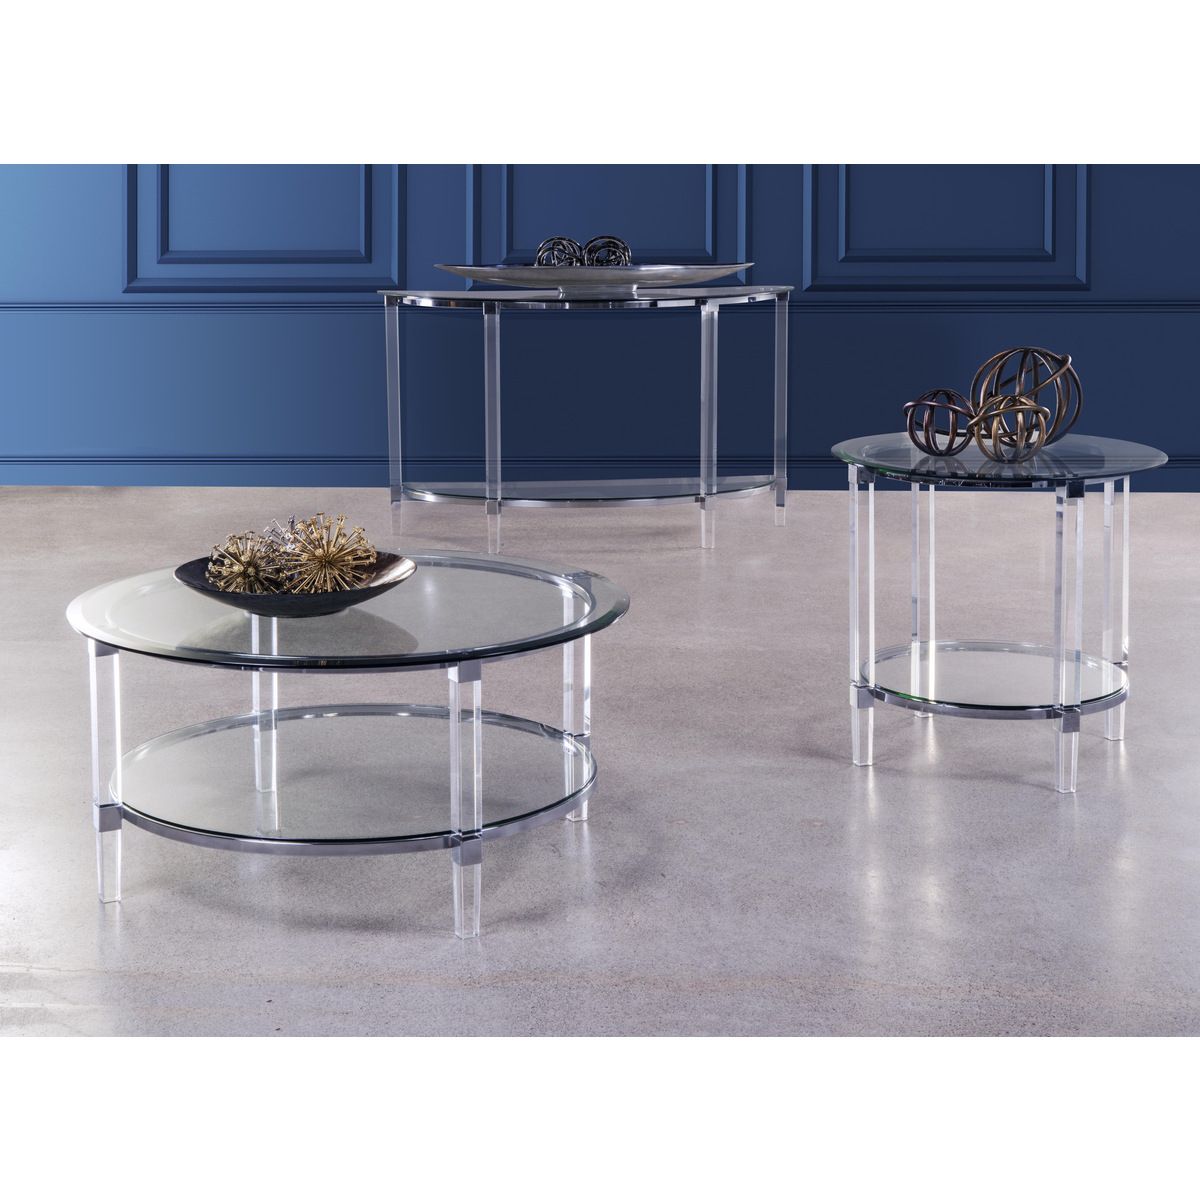 Acrylic Coffee Tables Inside Fashionable 3656 01 Round Coffee Table With Acrylic Legs (View 6 of 10)